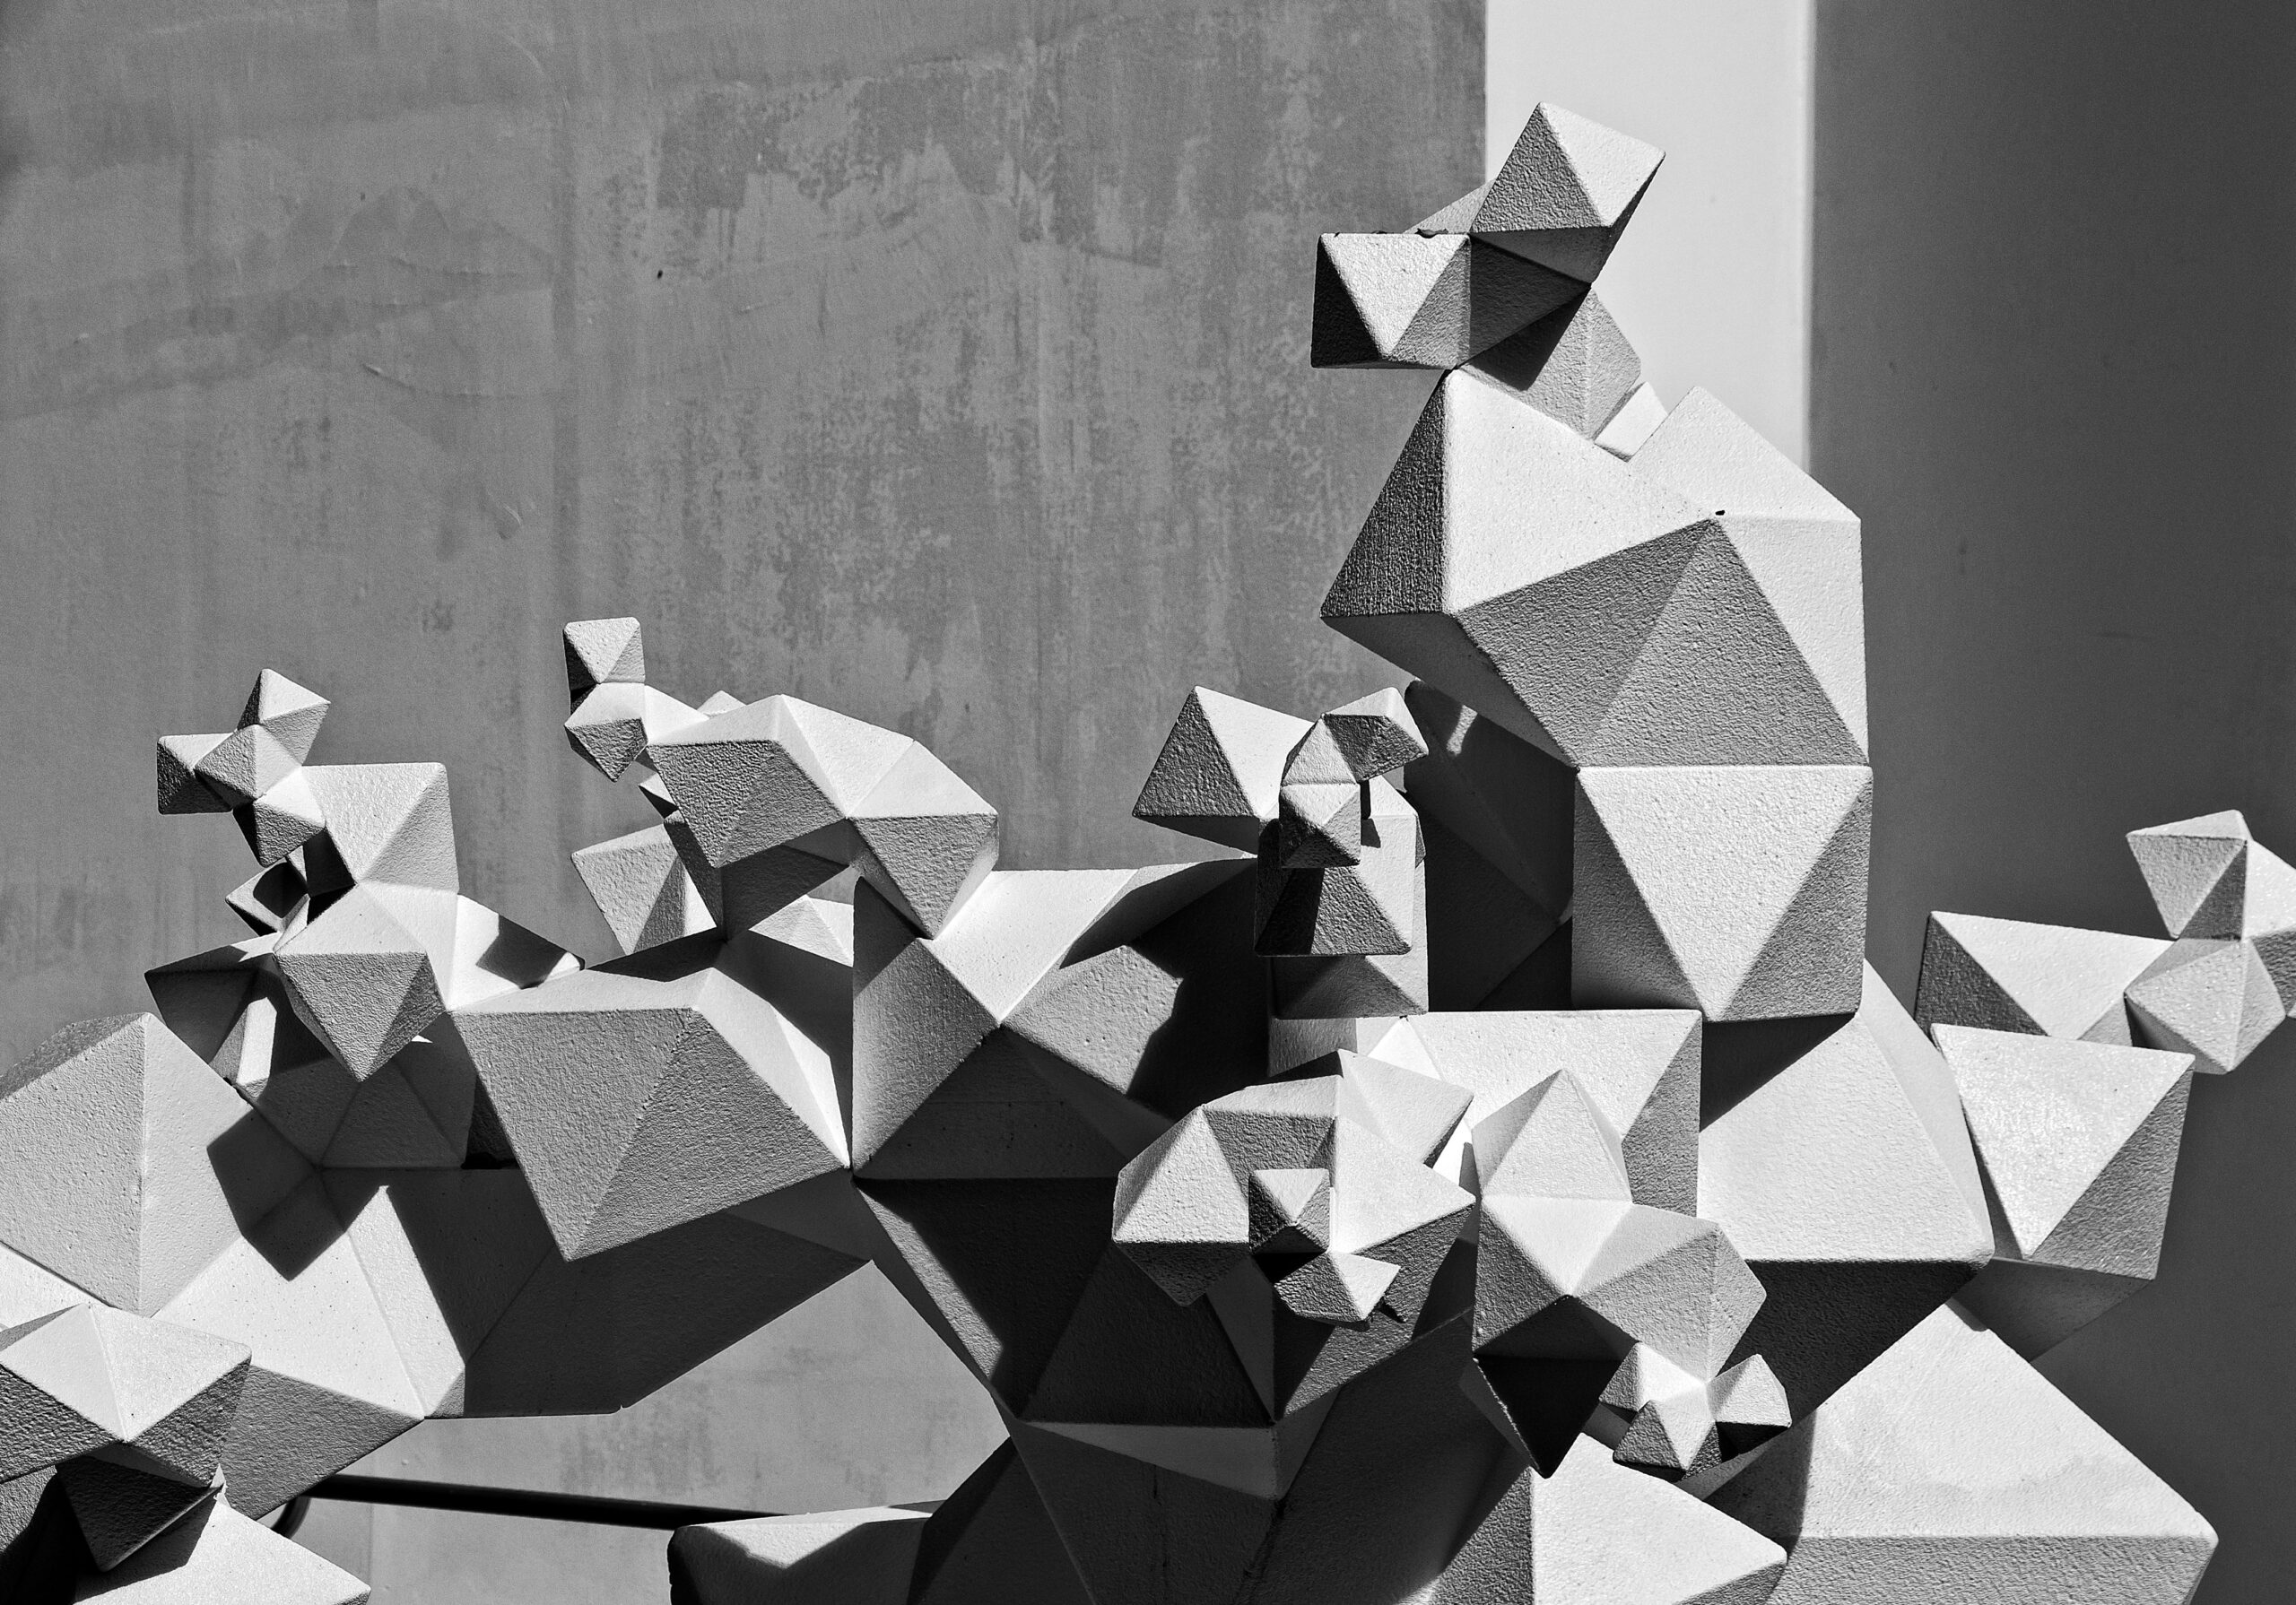 Abstract polygons in different shades of grey create an interesting sculpture